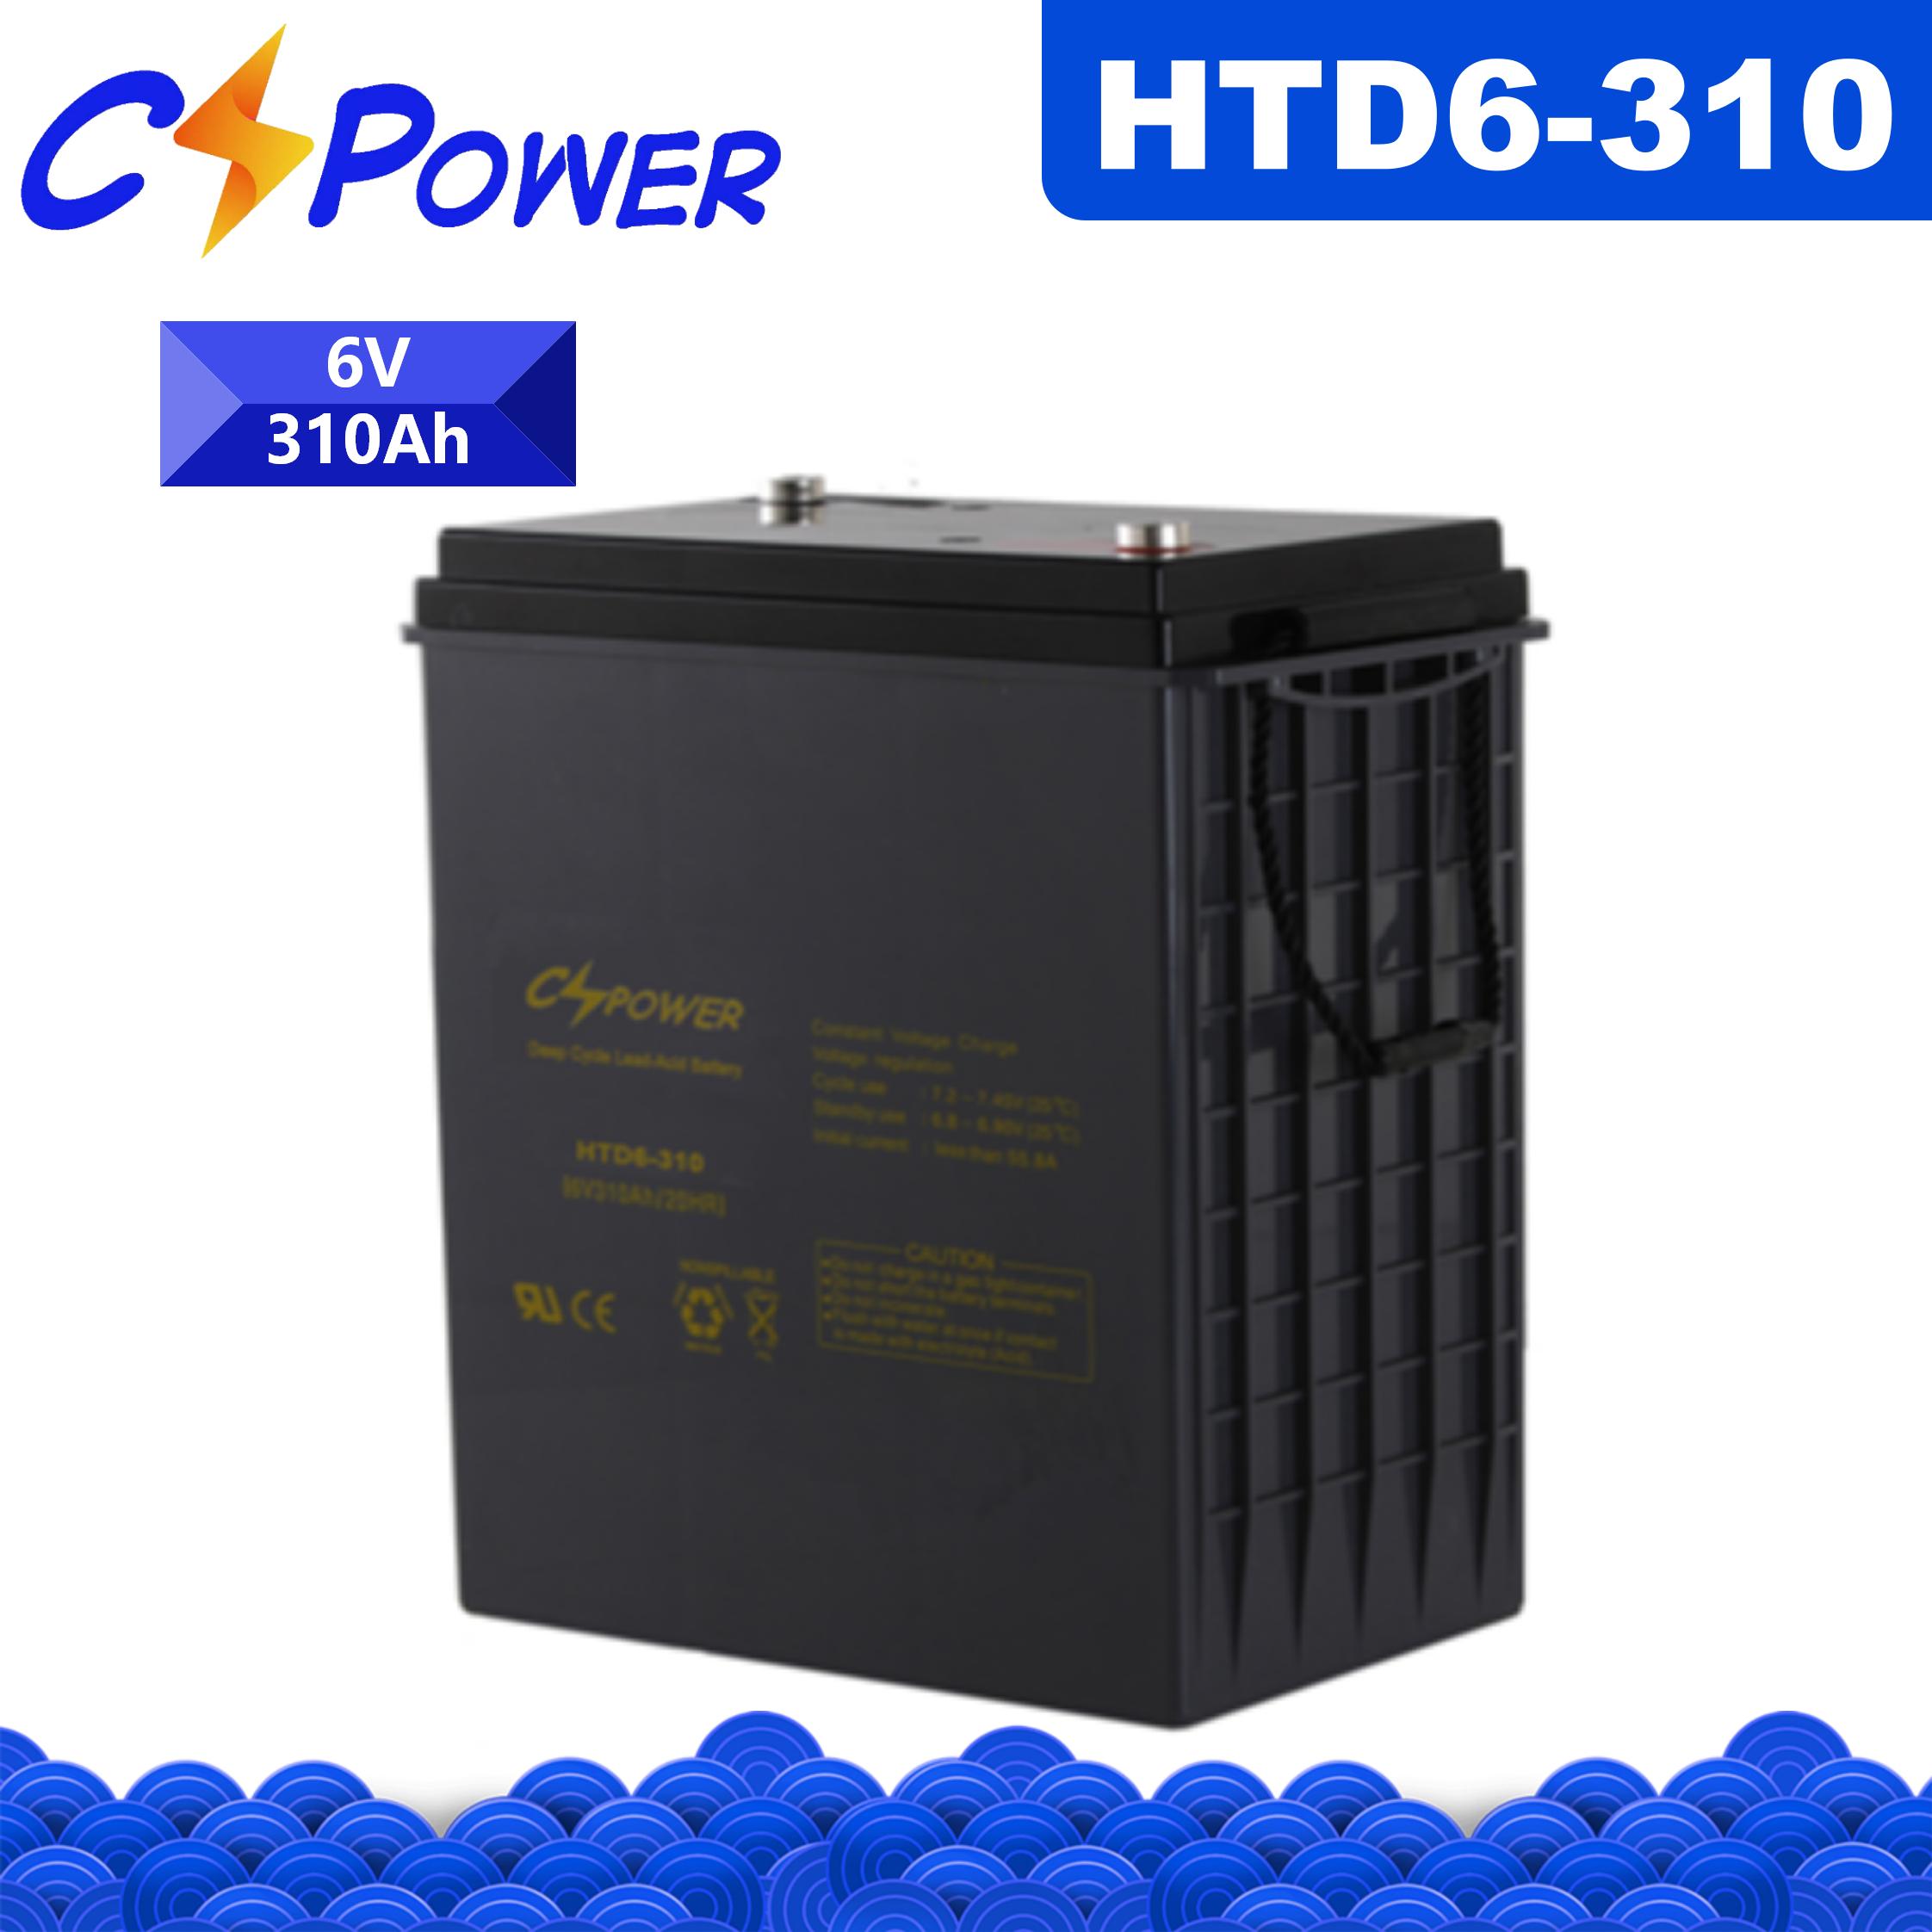 CSPower HTD6-310 Deep Cycle VRLA AGM Battery